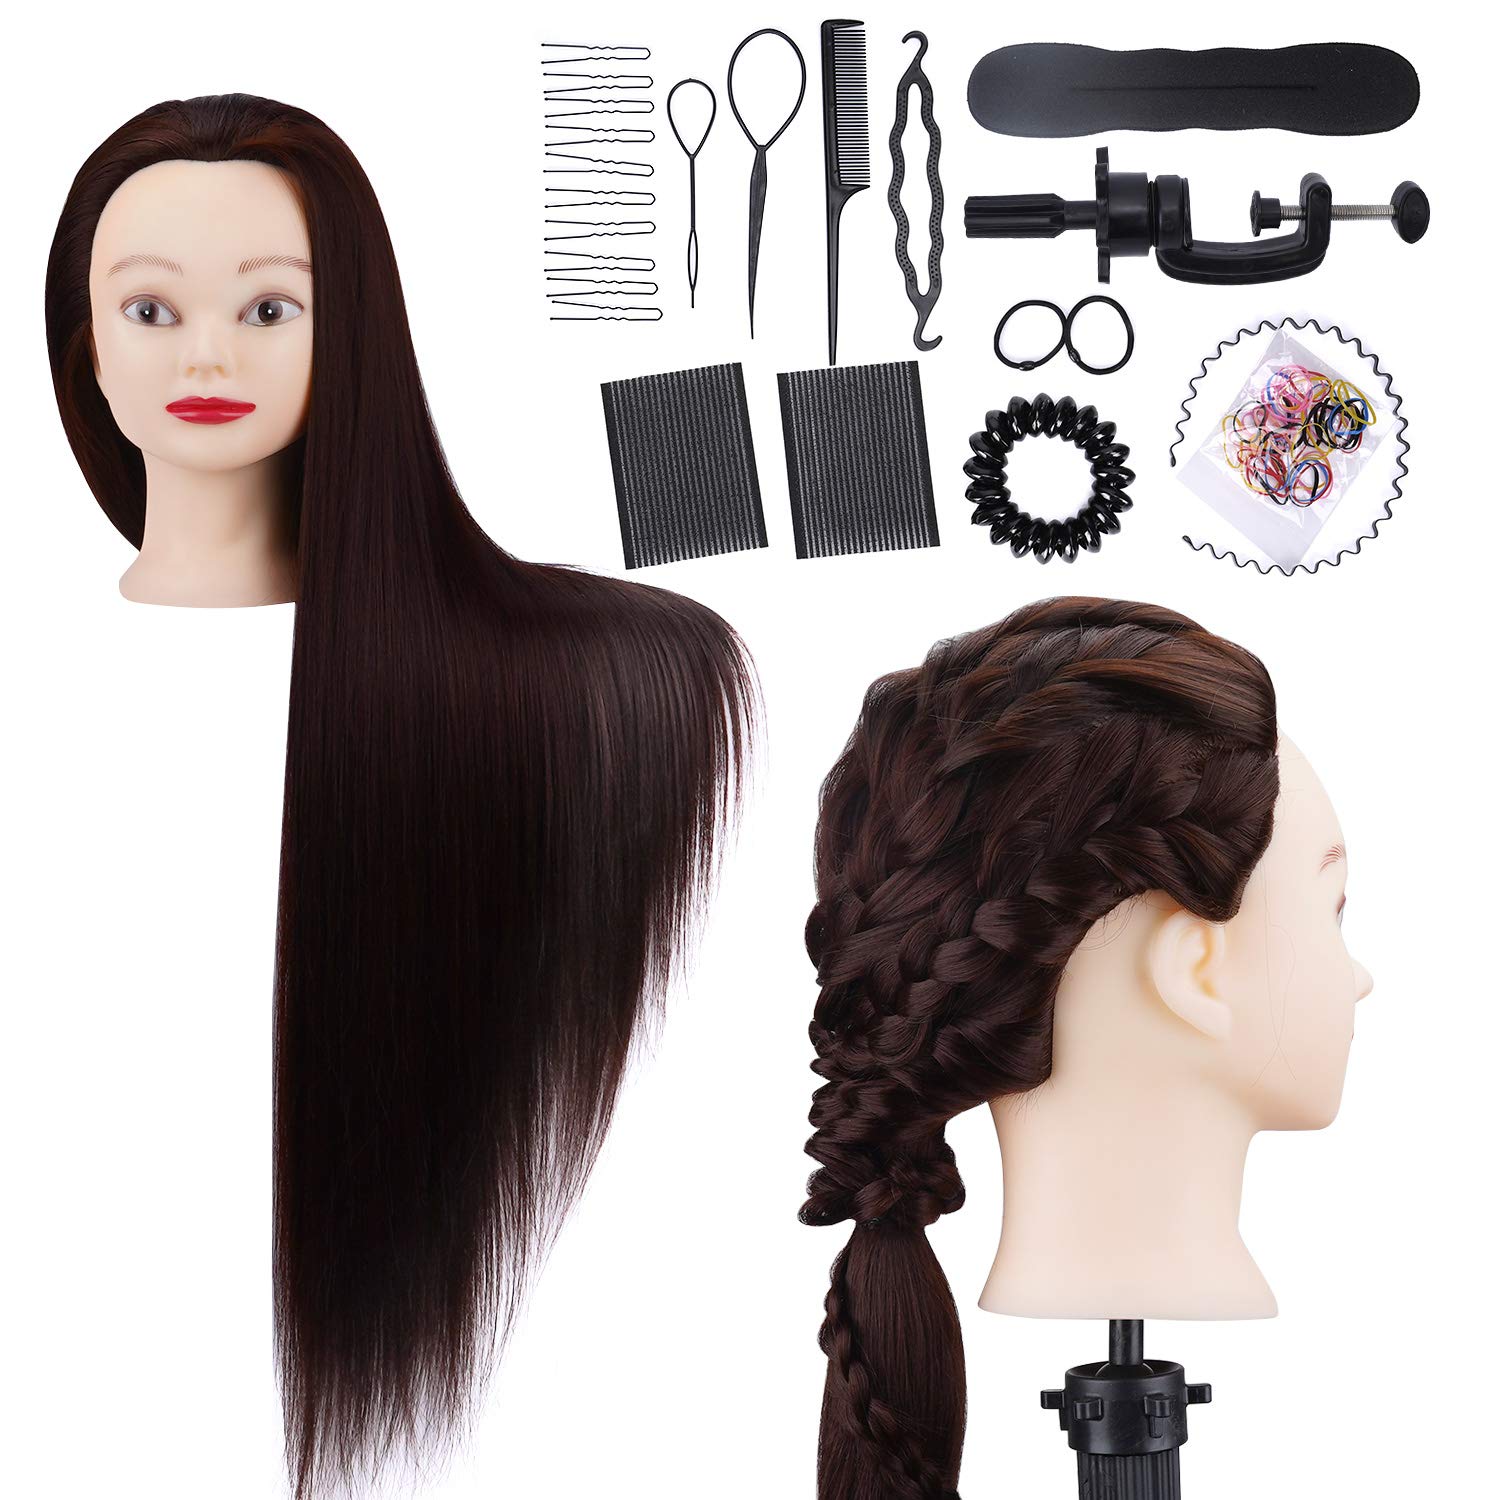 Aruohha's Cosmetology Kit for Students